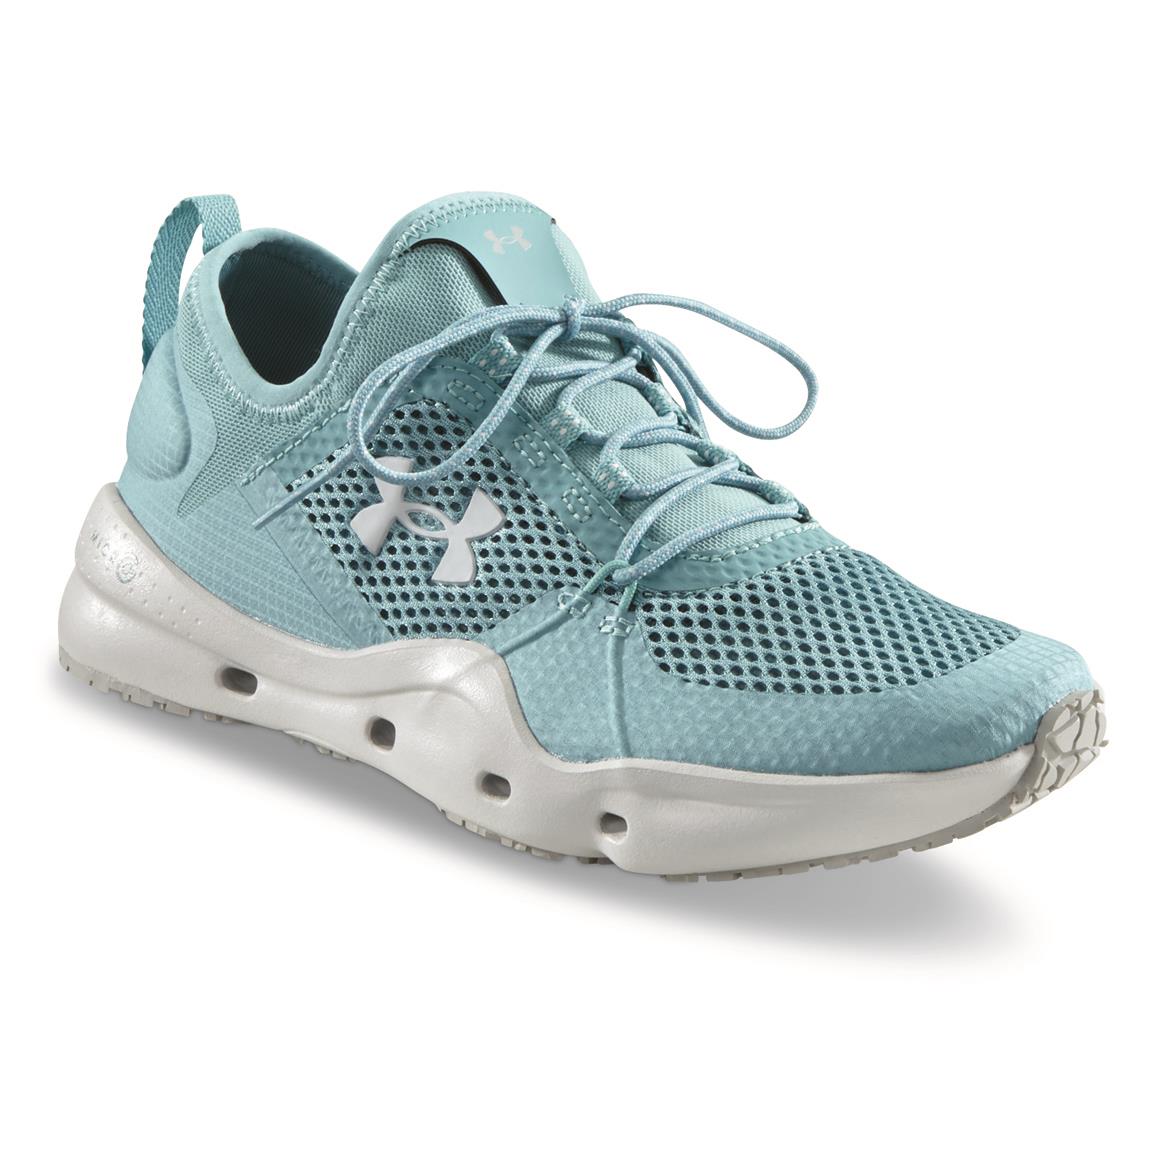 Under Armour Women's Micro G Kilchis Water Shoes, Cosmos/halo Gray/halo Gray